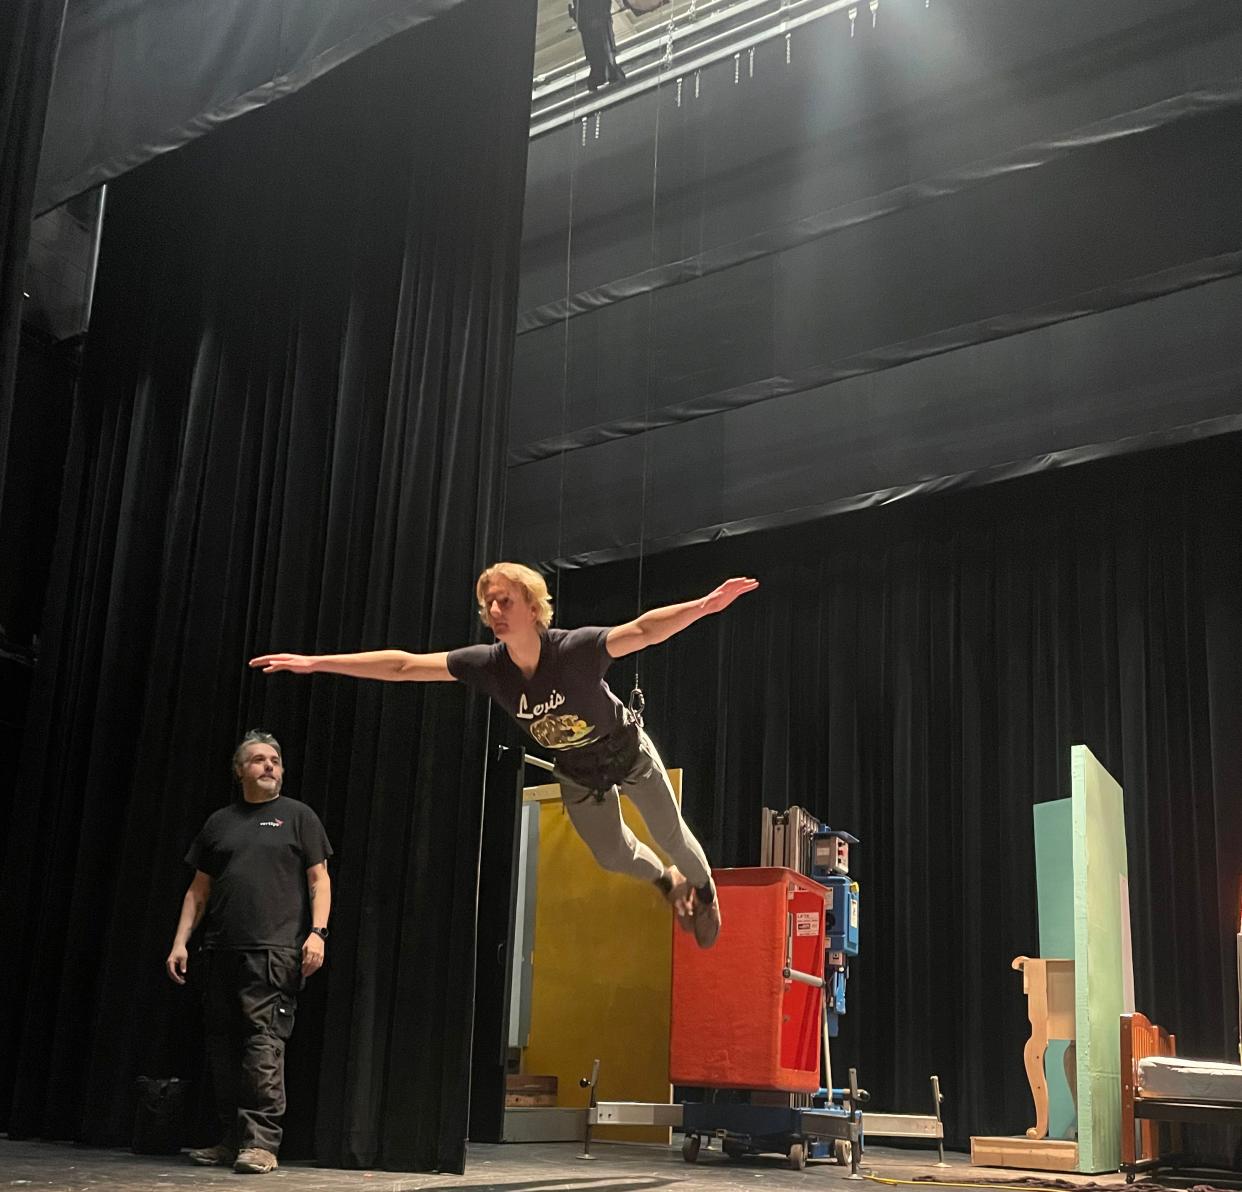 A Plymouth High School student practices flying on stage in preparation for the annual musical, which will be 'Mary Poppins.'